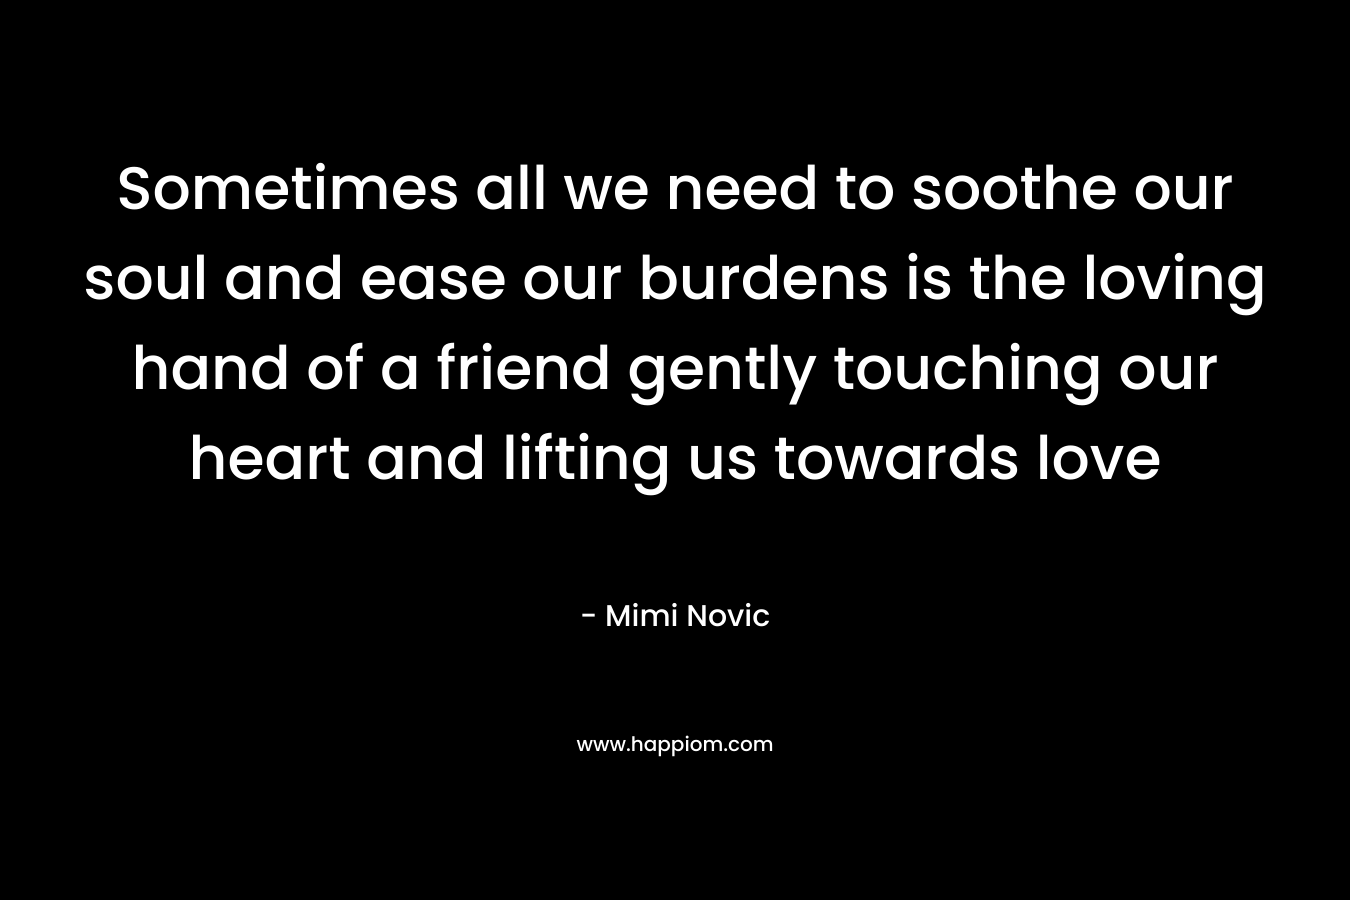 Sometimes all we need to soothe our soul and ease our burdens is the loving hand of a friend gently touching our heart and lifting us towards love – Mimi Novic